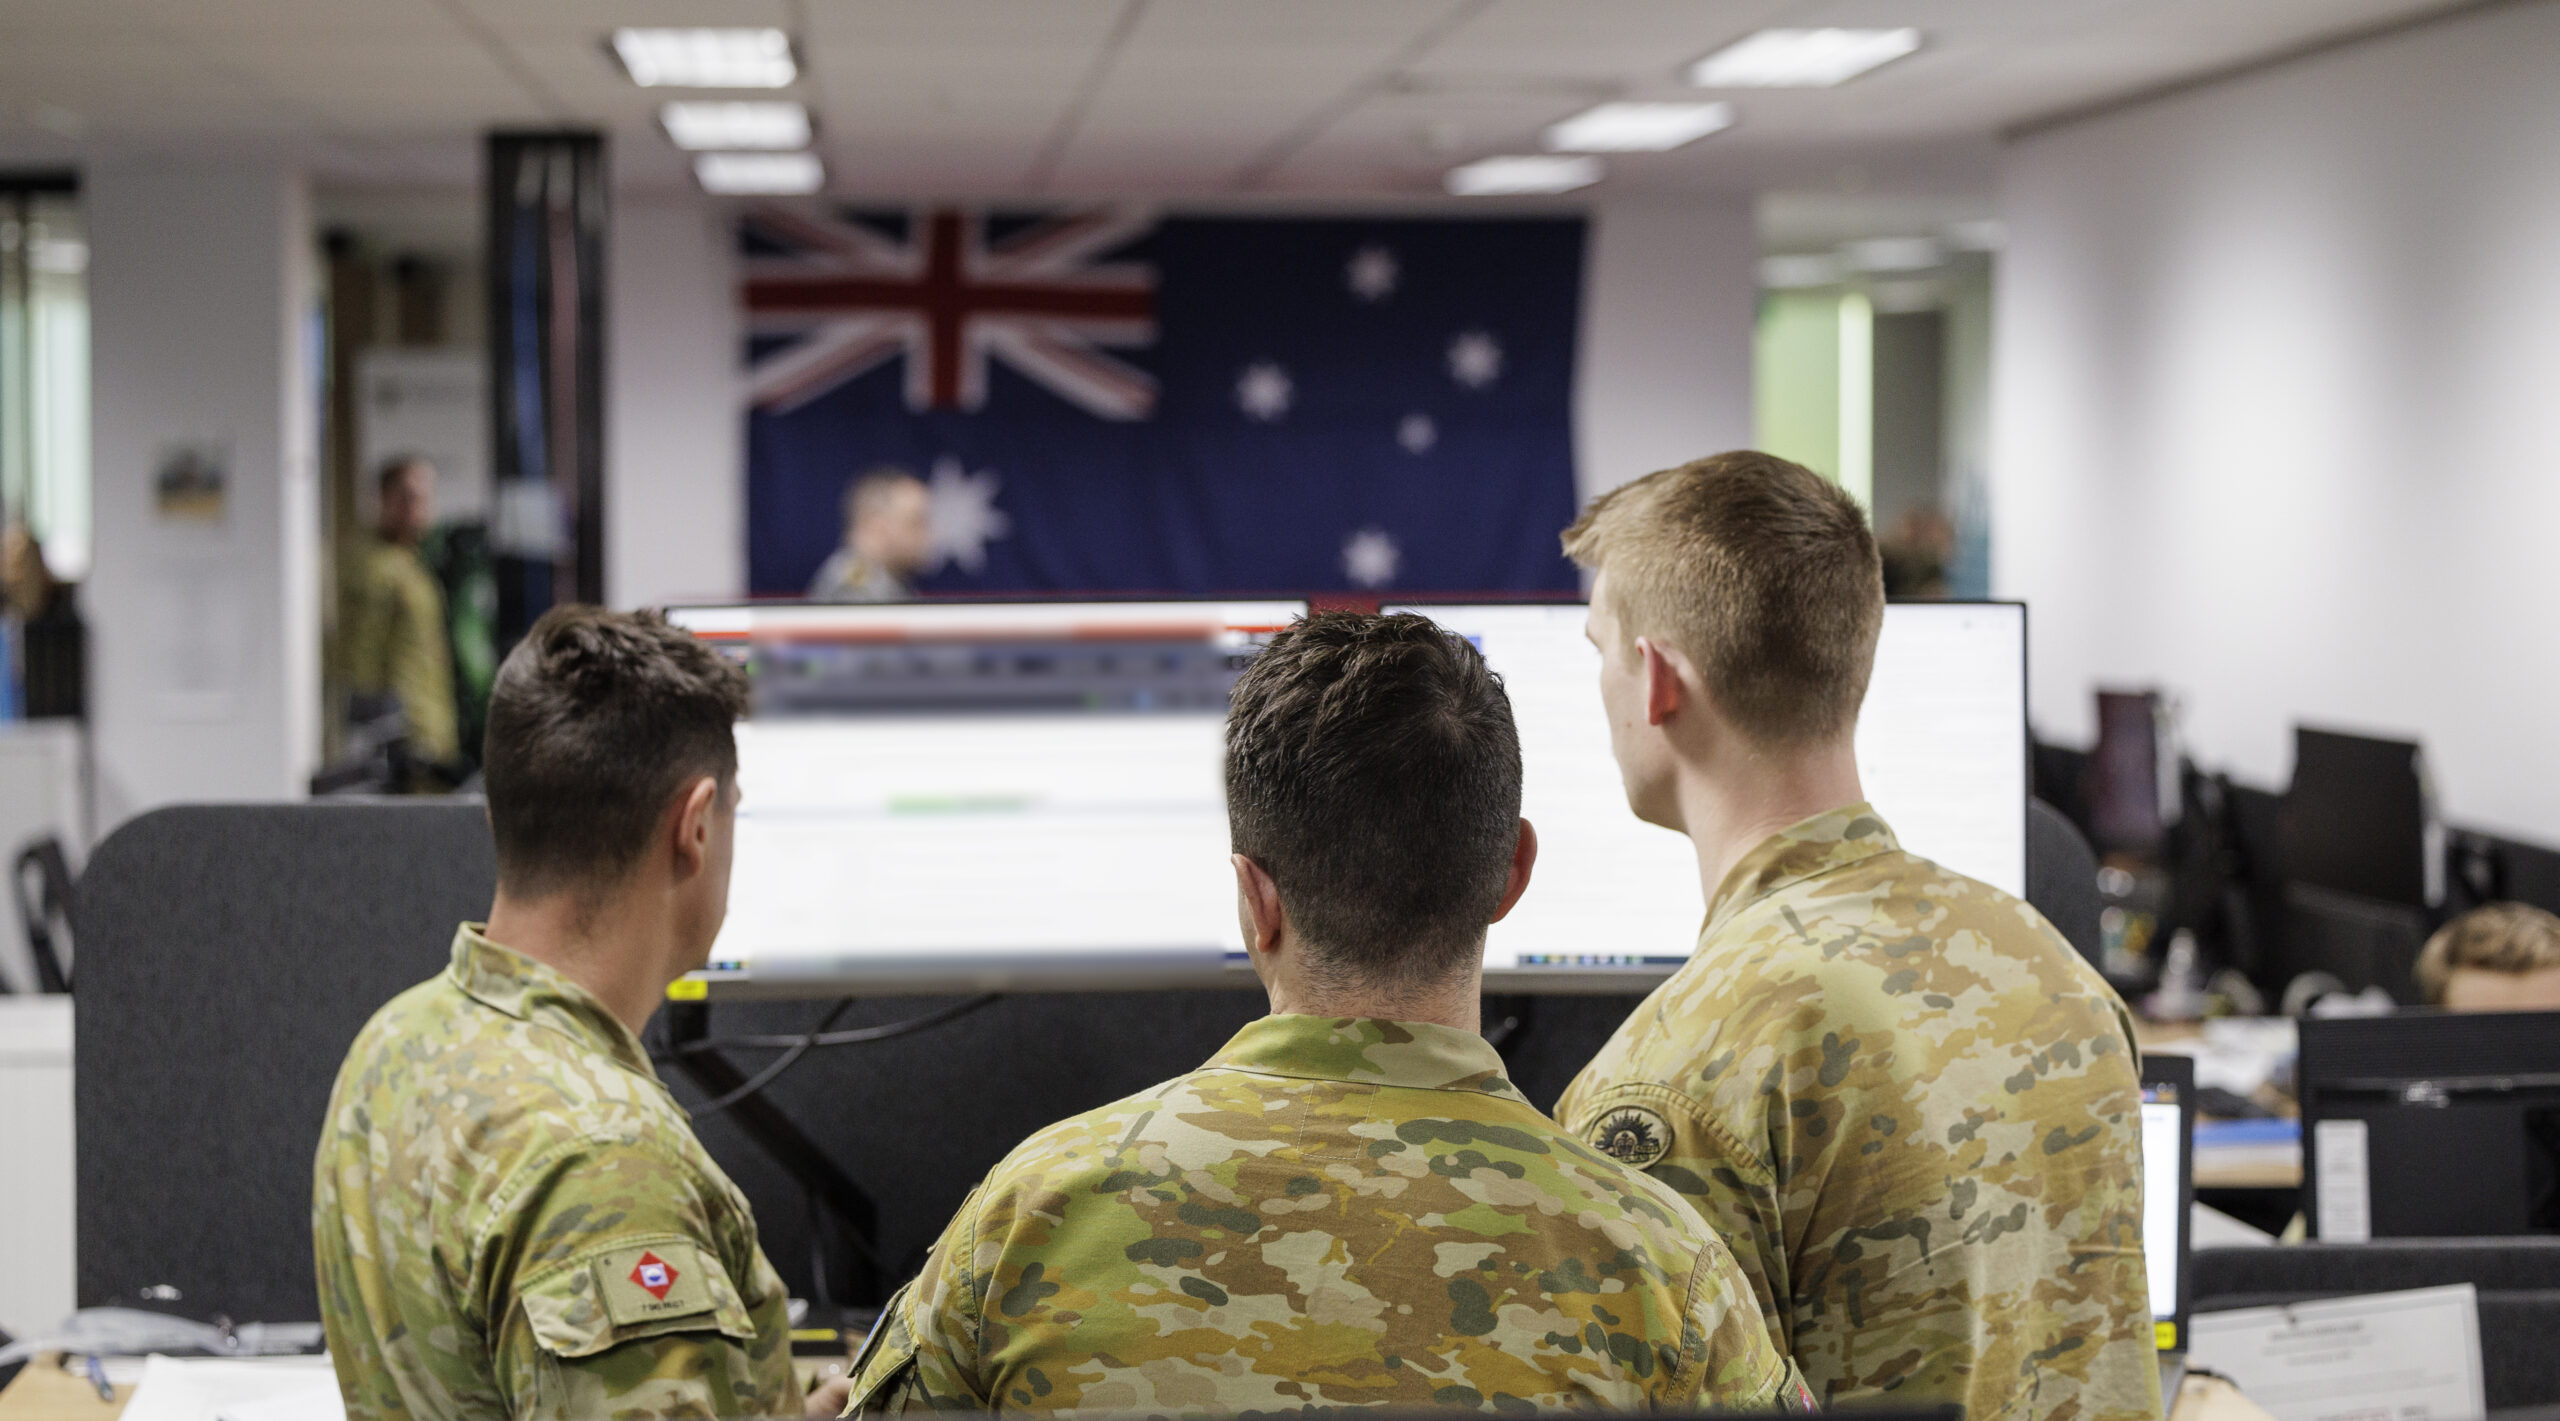 Australian Army personnel participate in Exercise Cyber Sentinel, held in Canberra, ACT. Imagery has been digital altered for security purposes. *** Local Caption *** Exercise Cyber Sentinels is an annual cyber exercise which was held 2  13 October 2023 in Canberra, ACT. This was the first time this exercise was planned and held at the secret/Five Eyes level in Australia by the Australian Defence Force (ADF), with previous exercises held by our global partners at a lower classification level. The ADF worked closely with United States Cyber Command (USCYBERCOM) in the planning of this exercise which is part of the global effort sharing of partner cyber readiness. Over 60 US Cyber Command personnel participated alongside over 90 ADF members. The participants were joined by a number of observers from Canada, New Zealand and the United Kingdom. The exercise comprised five blue force teams consisting of three Australian teams from the Australian Armys 138 Signals Squadron, Royal Australian Air Force 462 Squadron and Royal Australian Navy Fleet Cyber Unit, and two teams from the United States. Exercise Cyber Sentinels supports the training and development continuum of cyber units by honing individual and collective cyber-based skills. Additionally, the networking and learning opportunities from other nations are benefitting the ADF to further develop in the Cyber Domain and supporting reciprocal training opportunities in the future.